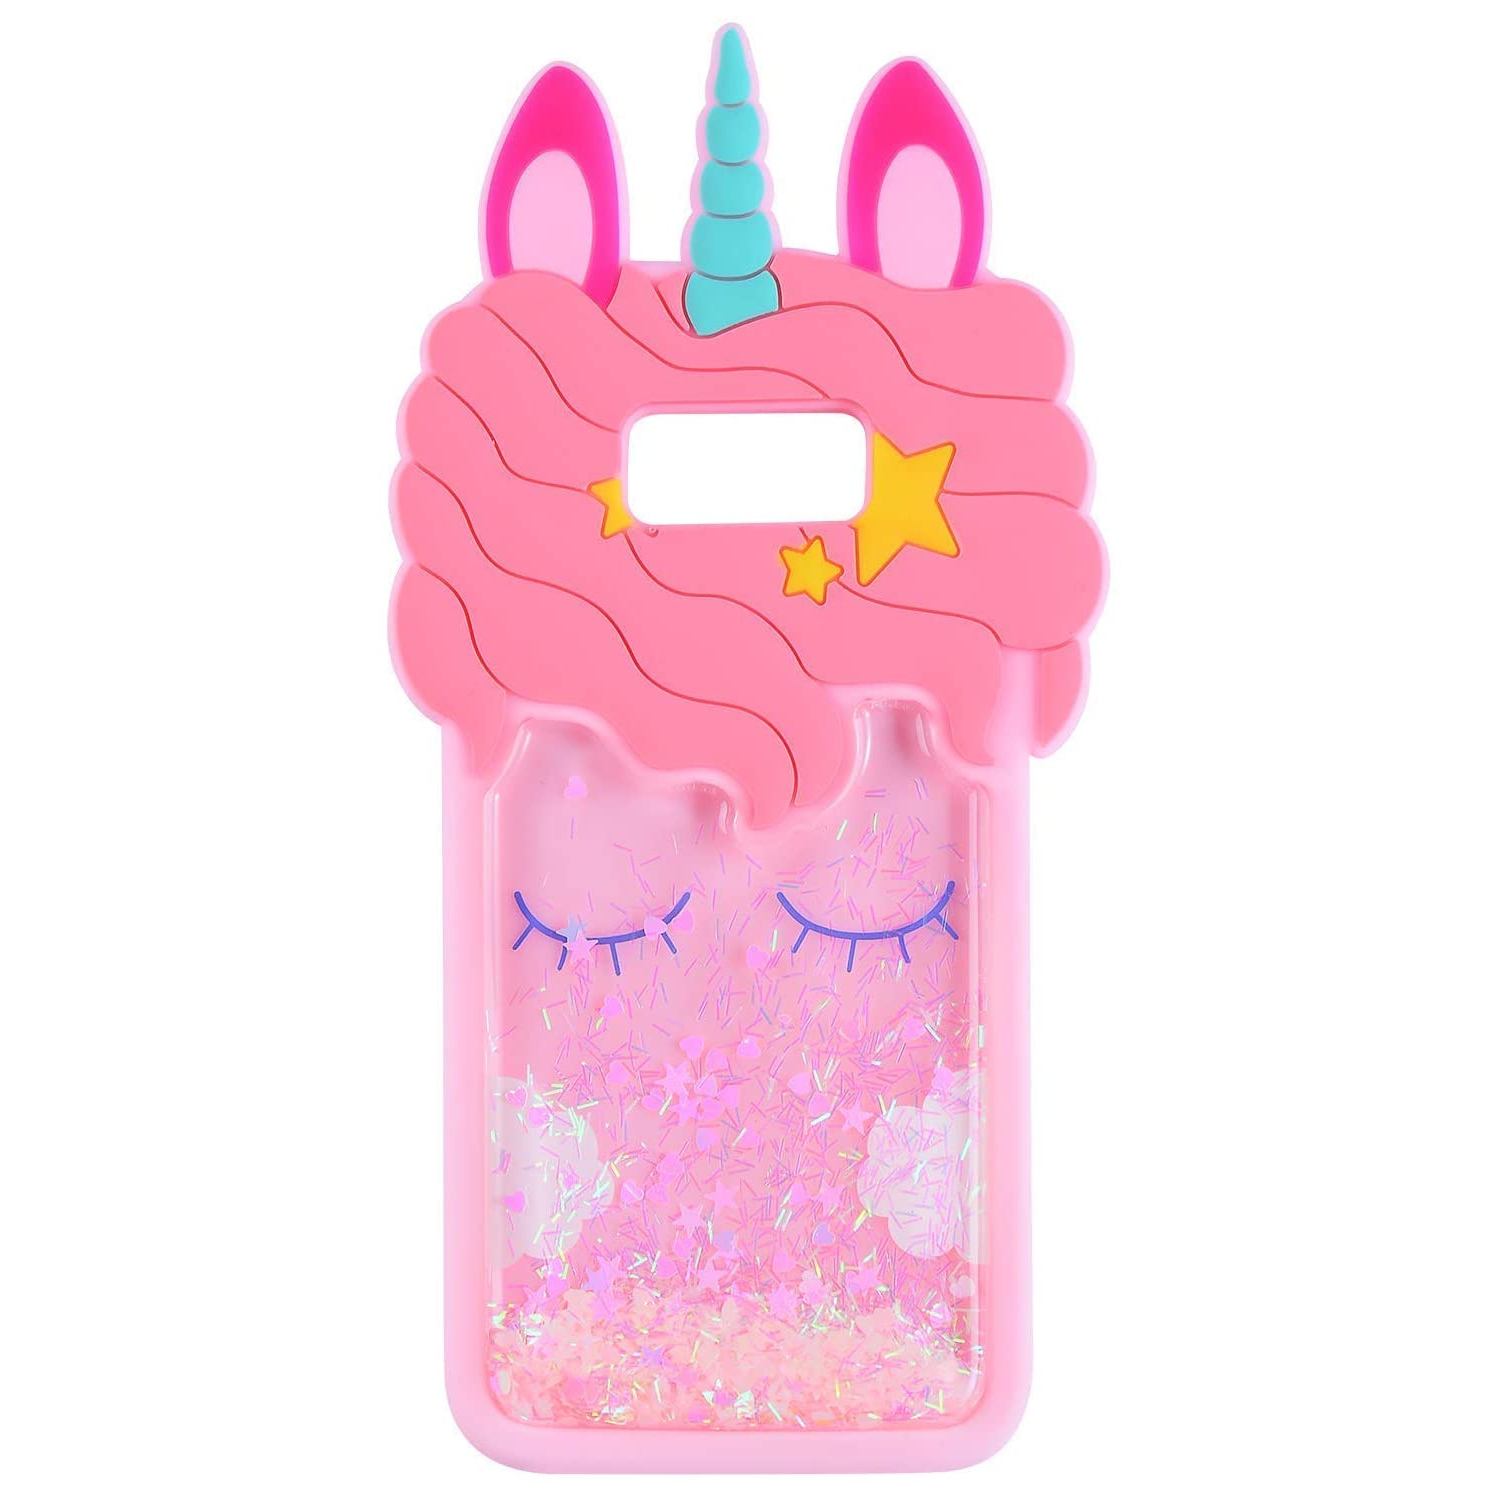 TopSZ Quicksand Unicorn Pink Case for Samsung Galaxy S6,S7,Silicone 3D Cartoon Shiny Animal Glitter Cover,Kids Girls Teen Coo